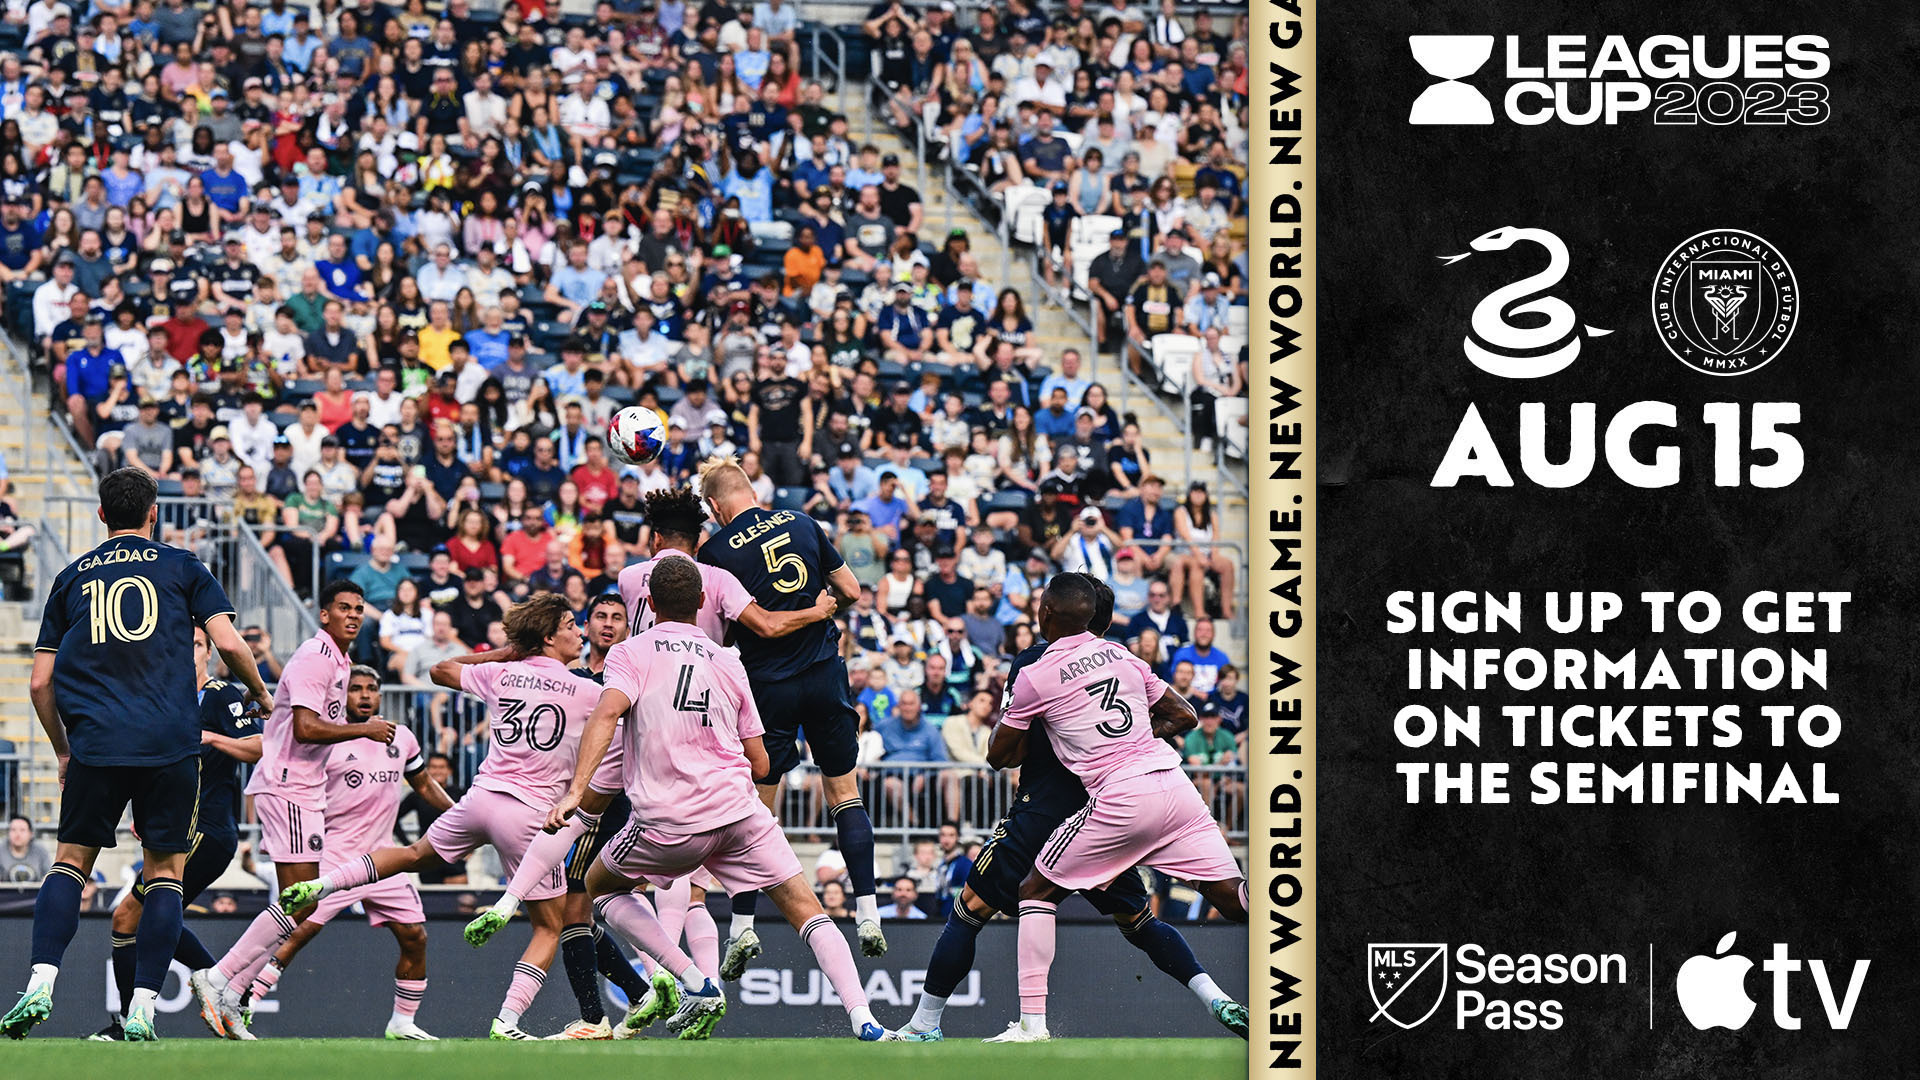 Philadelphia Union uses interesting tactics to sell tickets for the 2023  Leagues Cup Semifinal : r/PhillyUnion